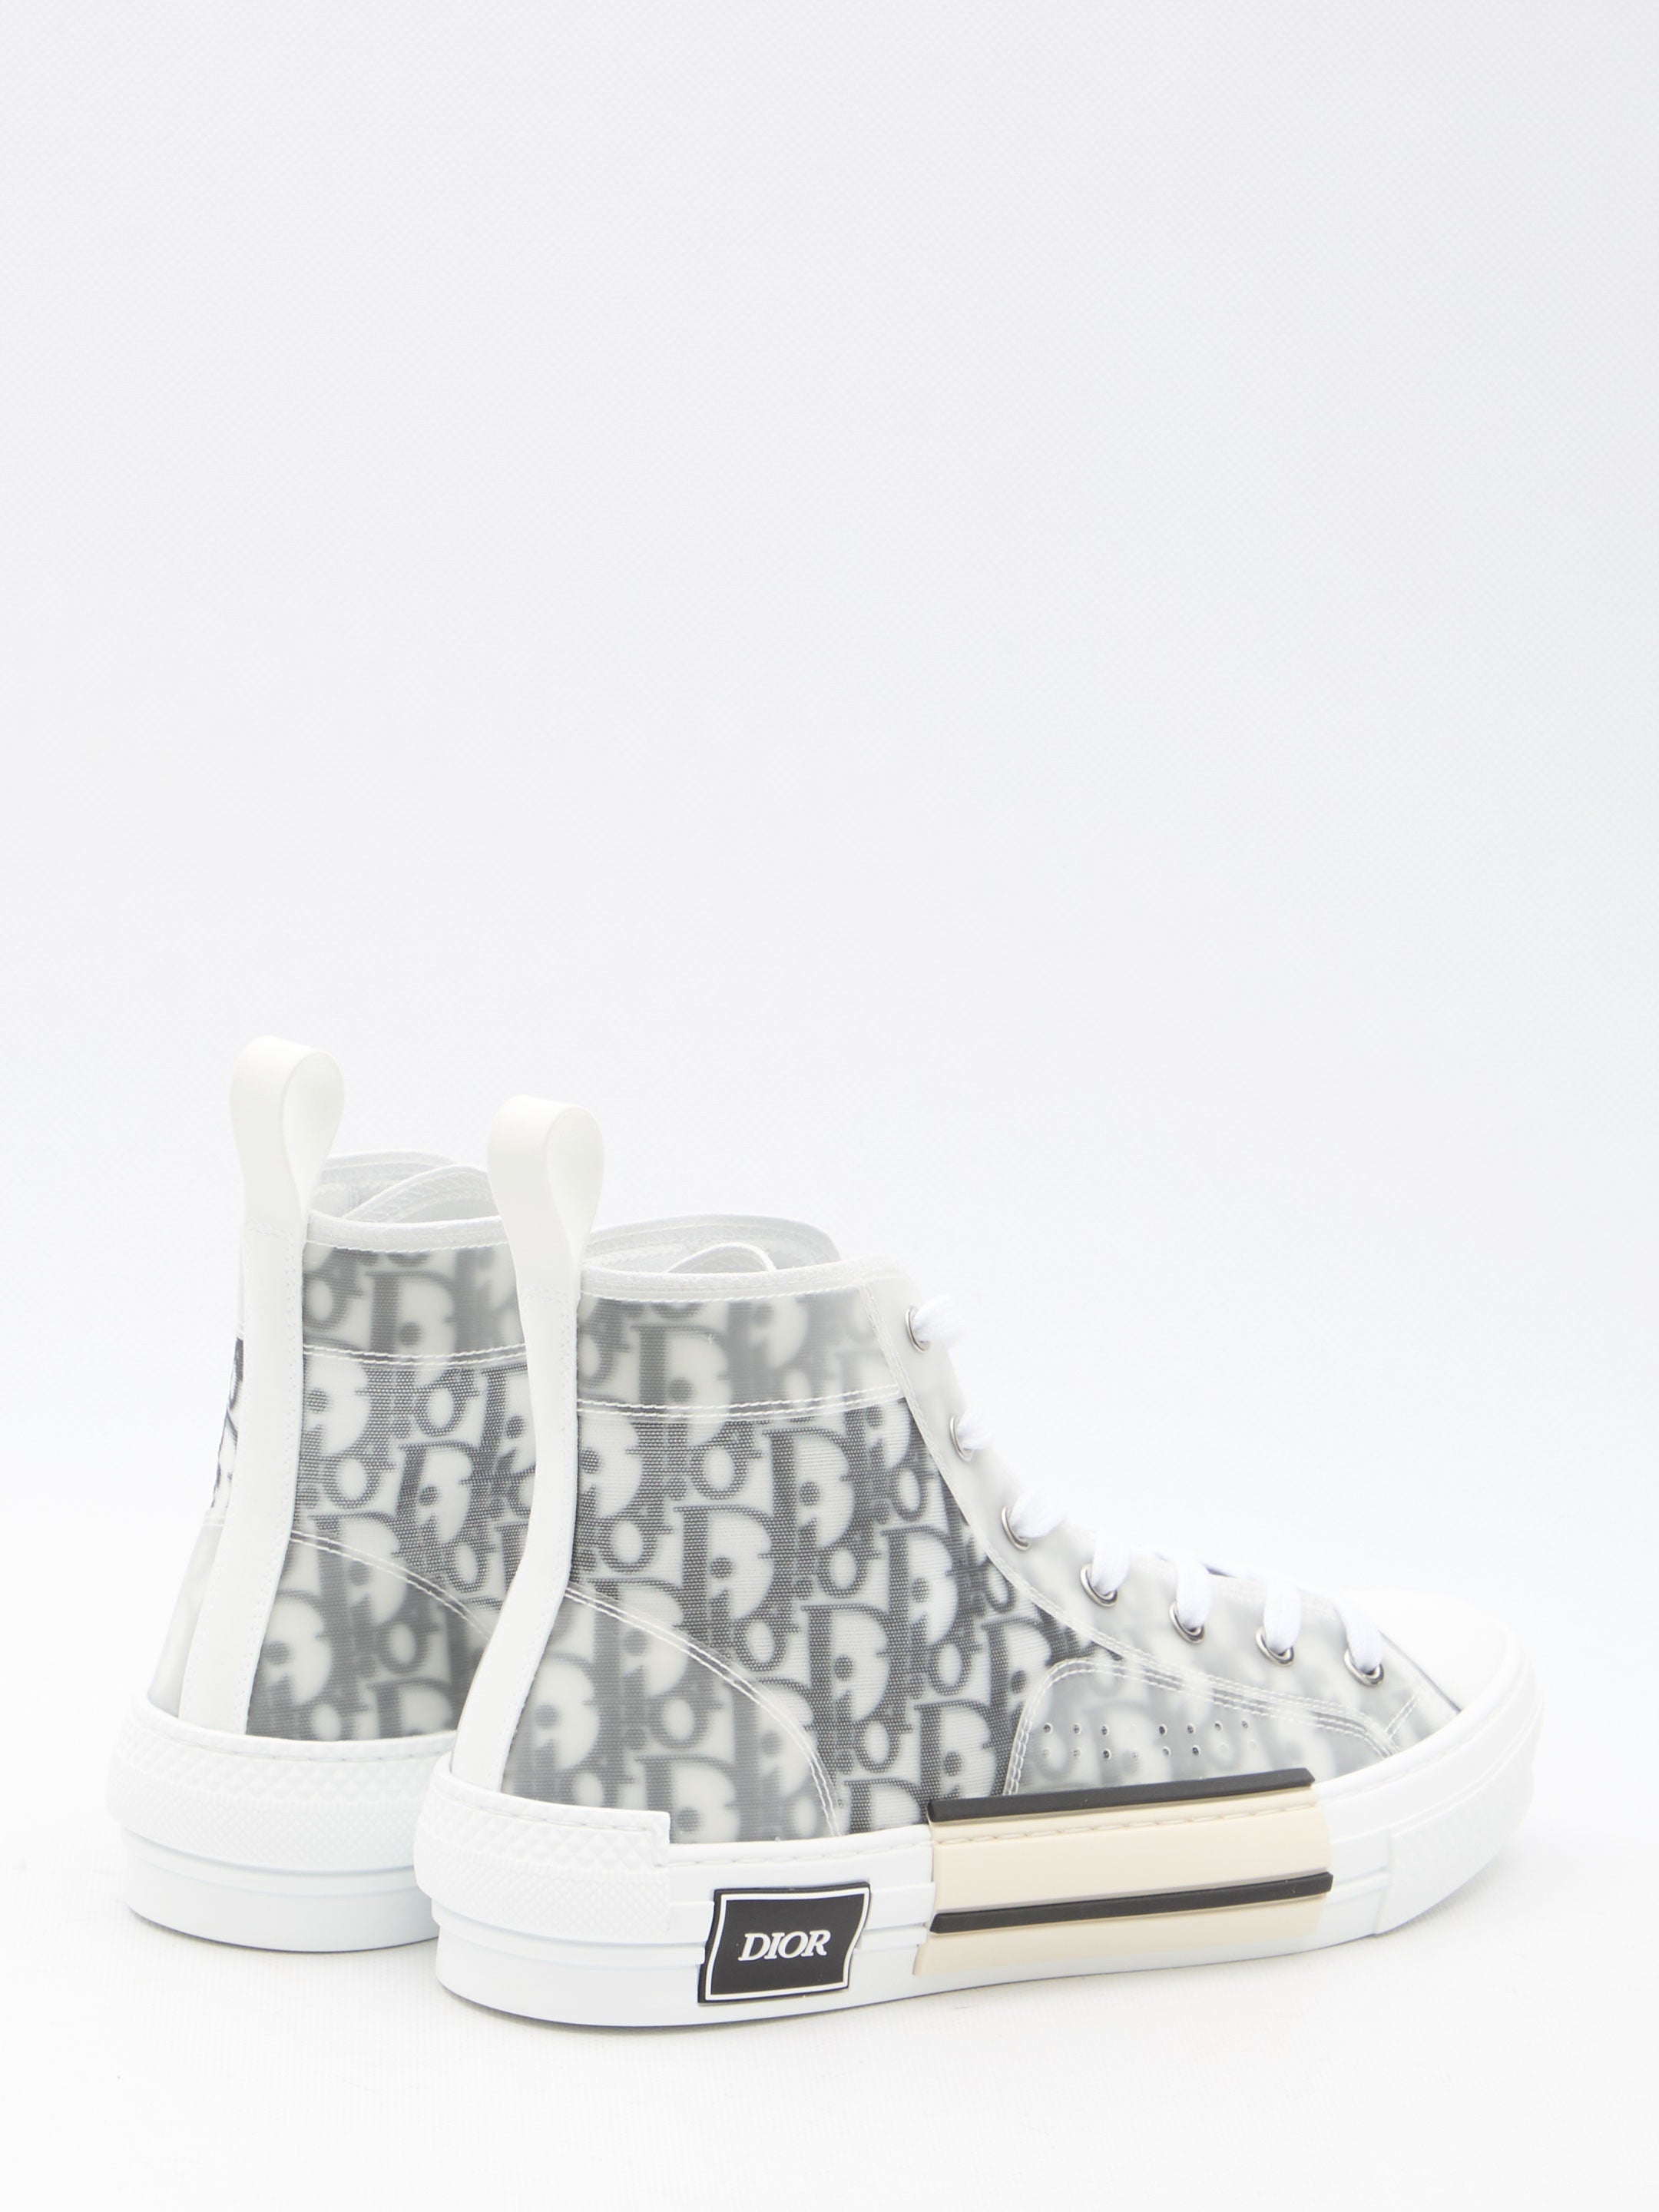 DIOR-HOMME-OUTLET-SALE-B23-high-top-sneakers-Sneakers-ARCHIVE-COLLECTION-3.jpg